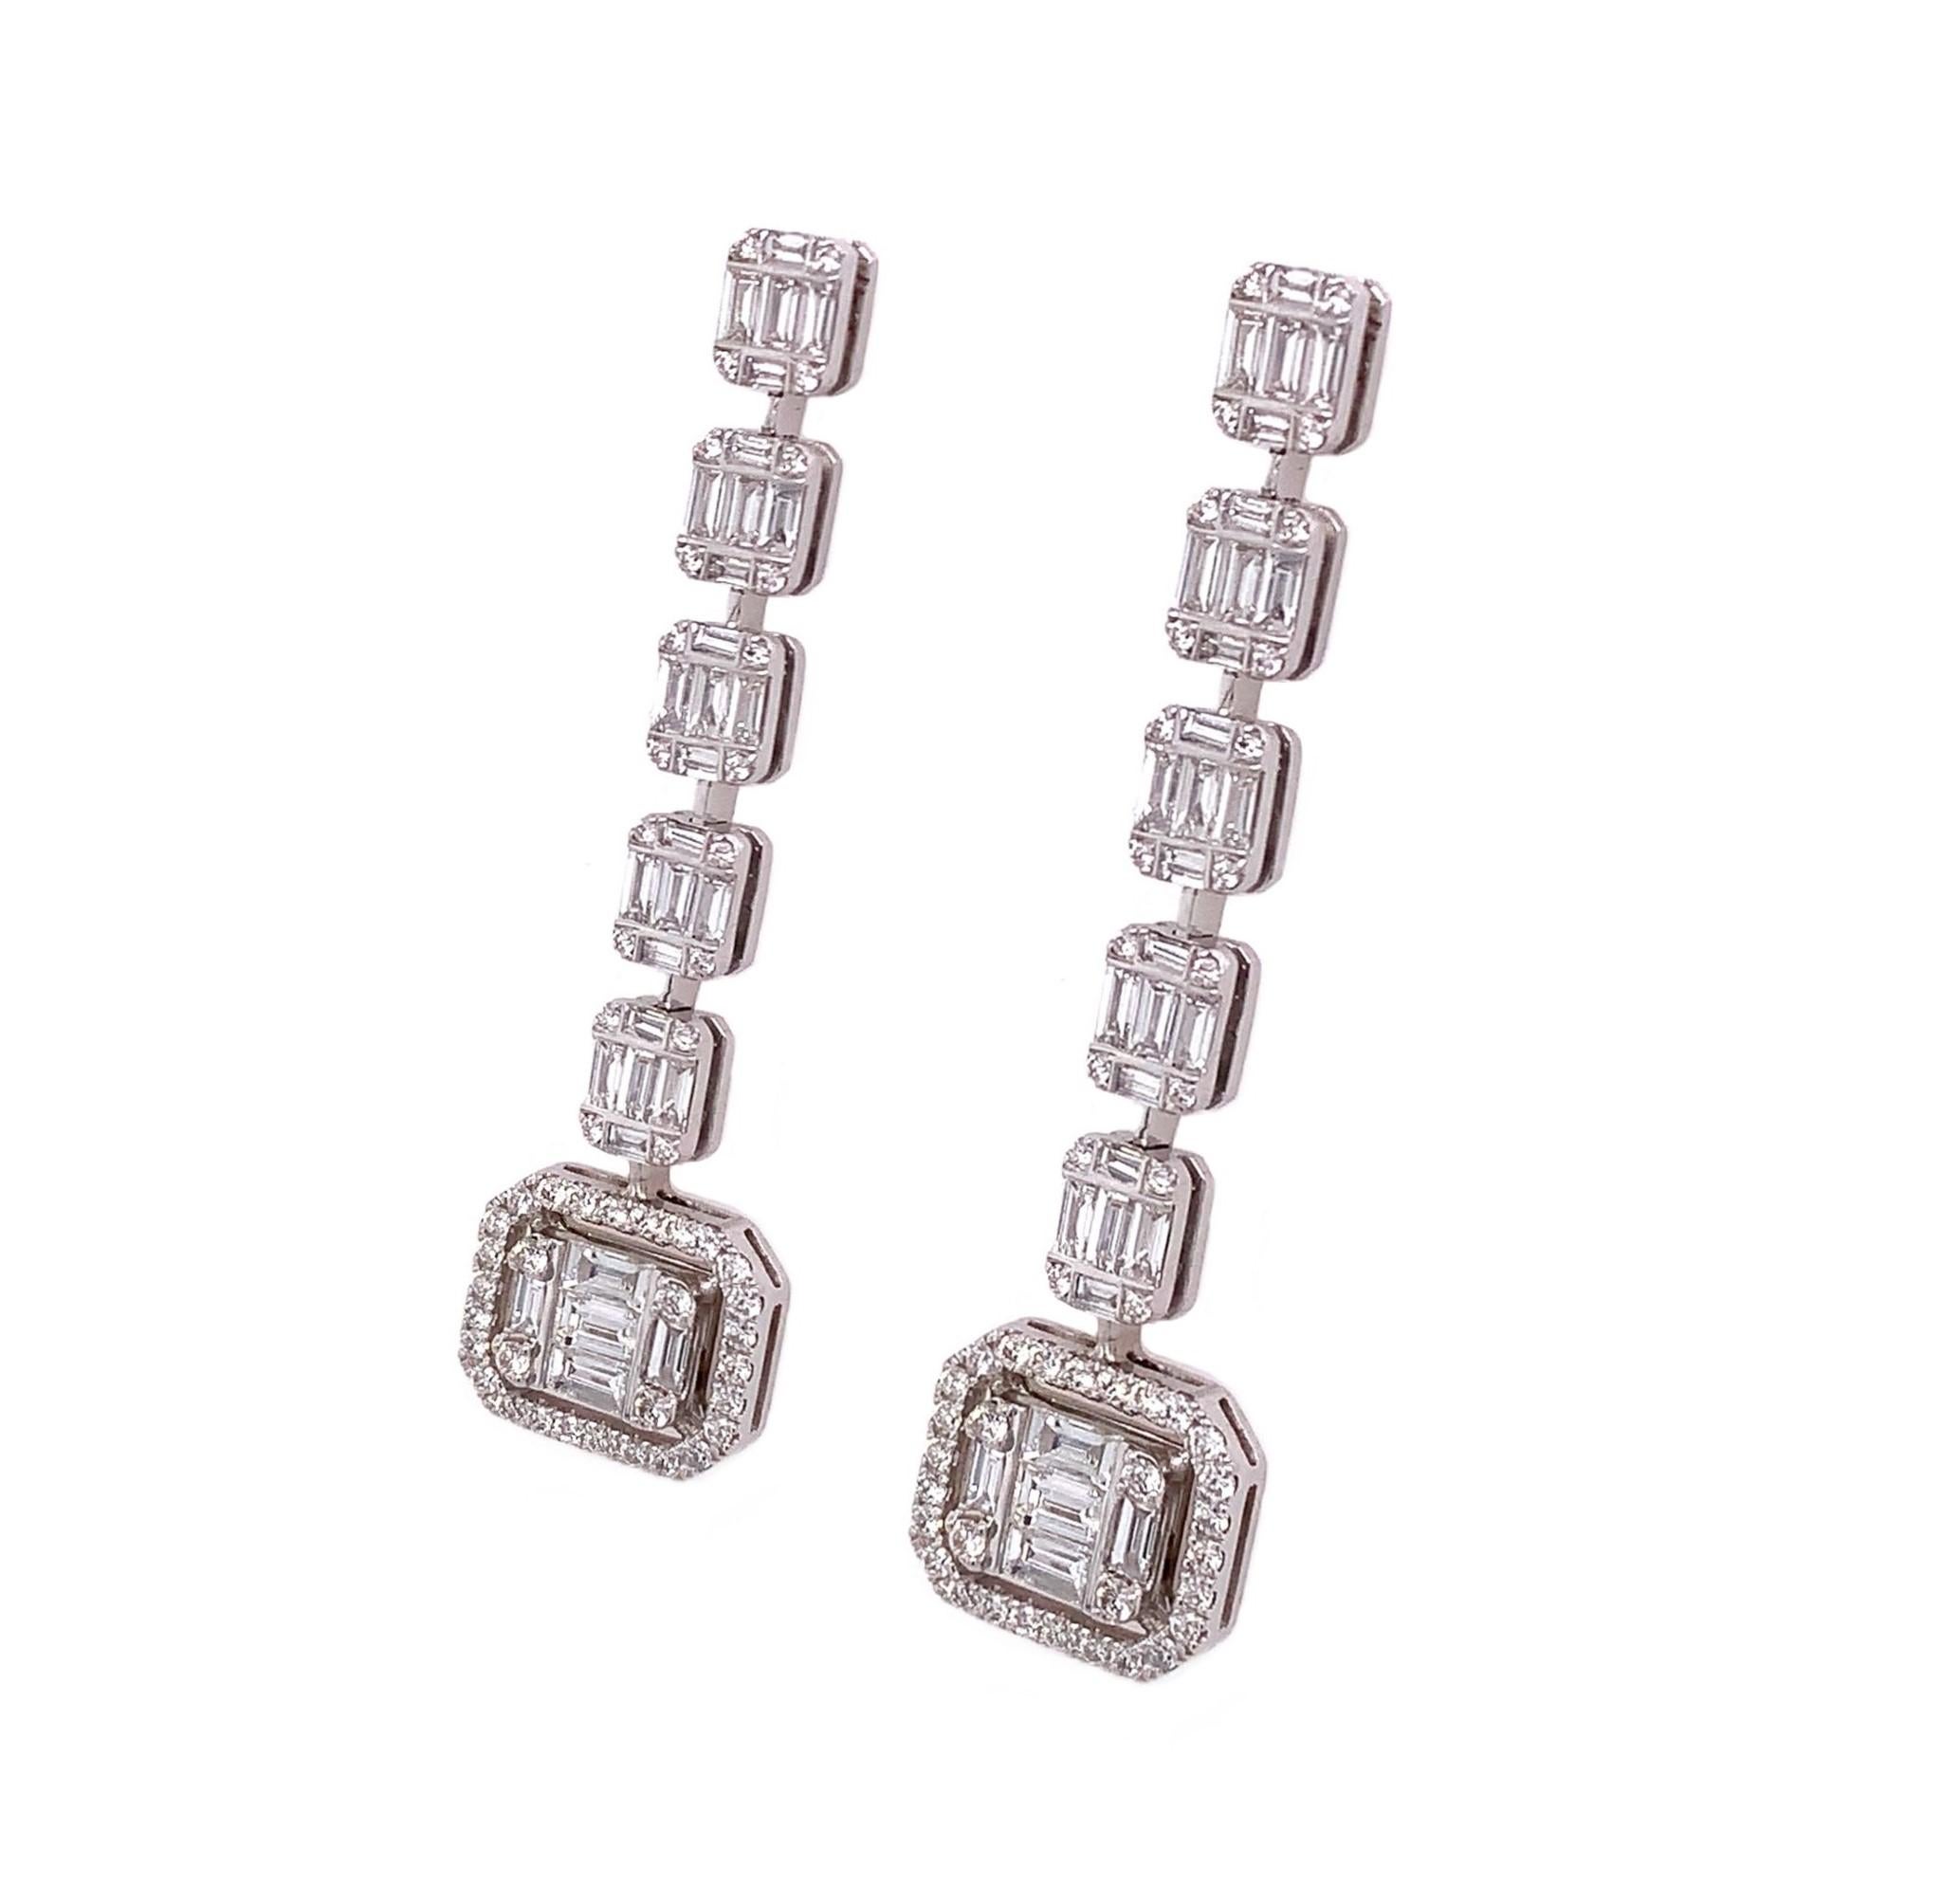 Baguette Collection

Baguette Diamond dangle earrings set in 18K White Gold.

Diamond: 1.85ct total weight.
All diamonds are G-H/SI stones.
